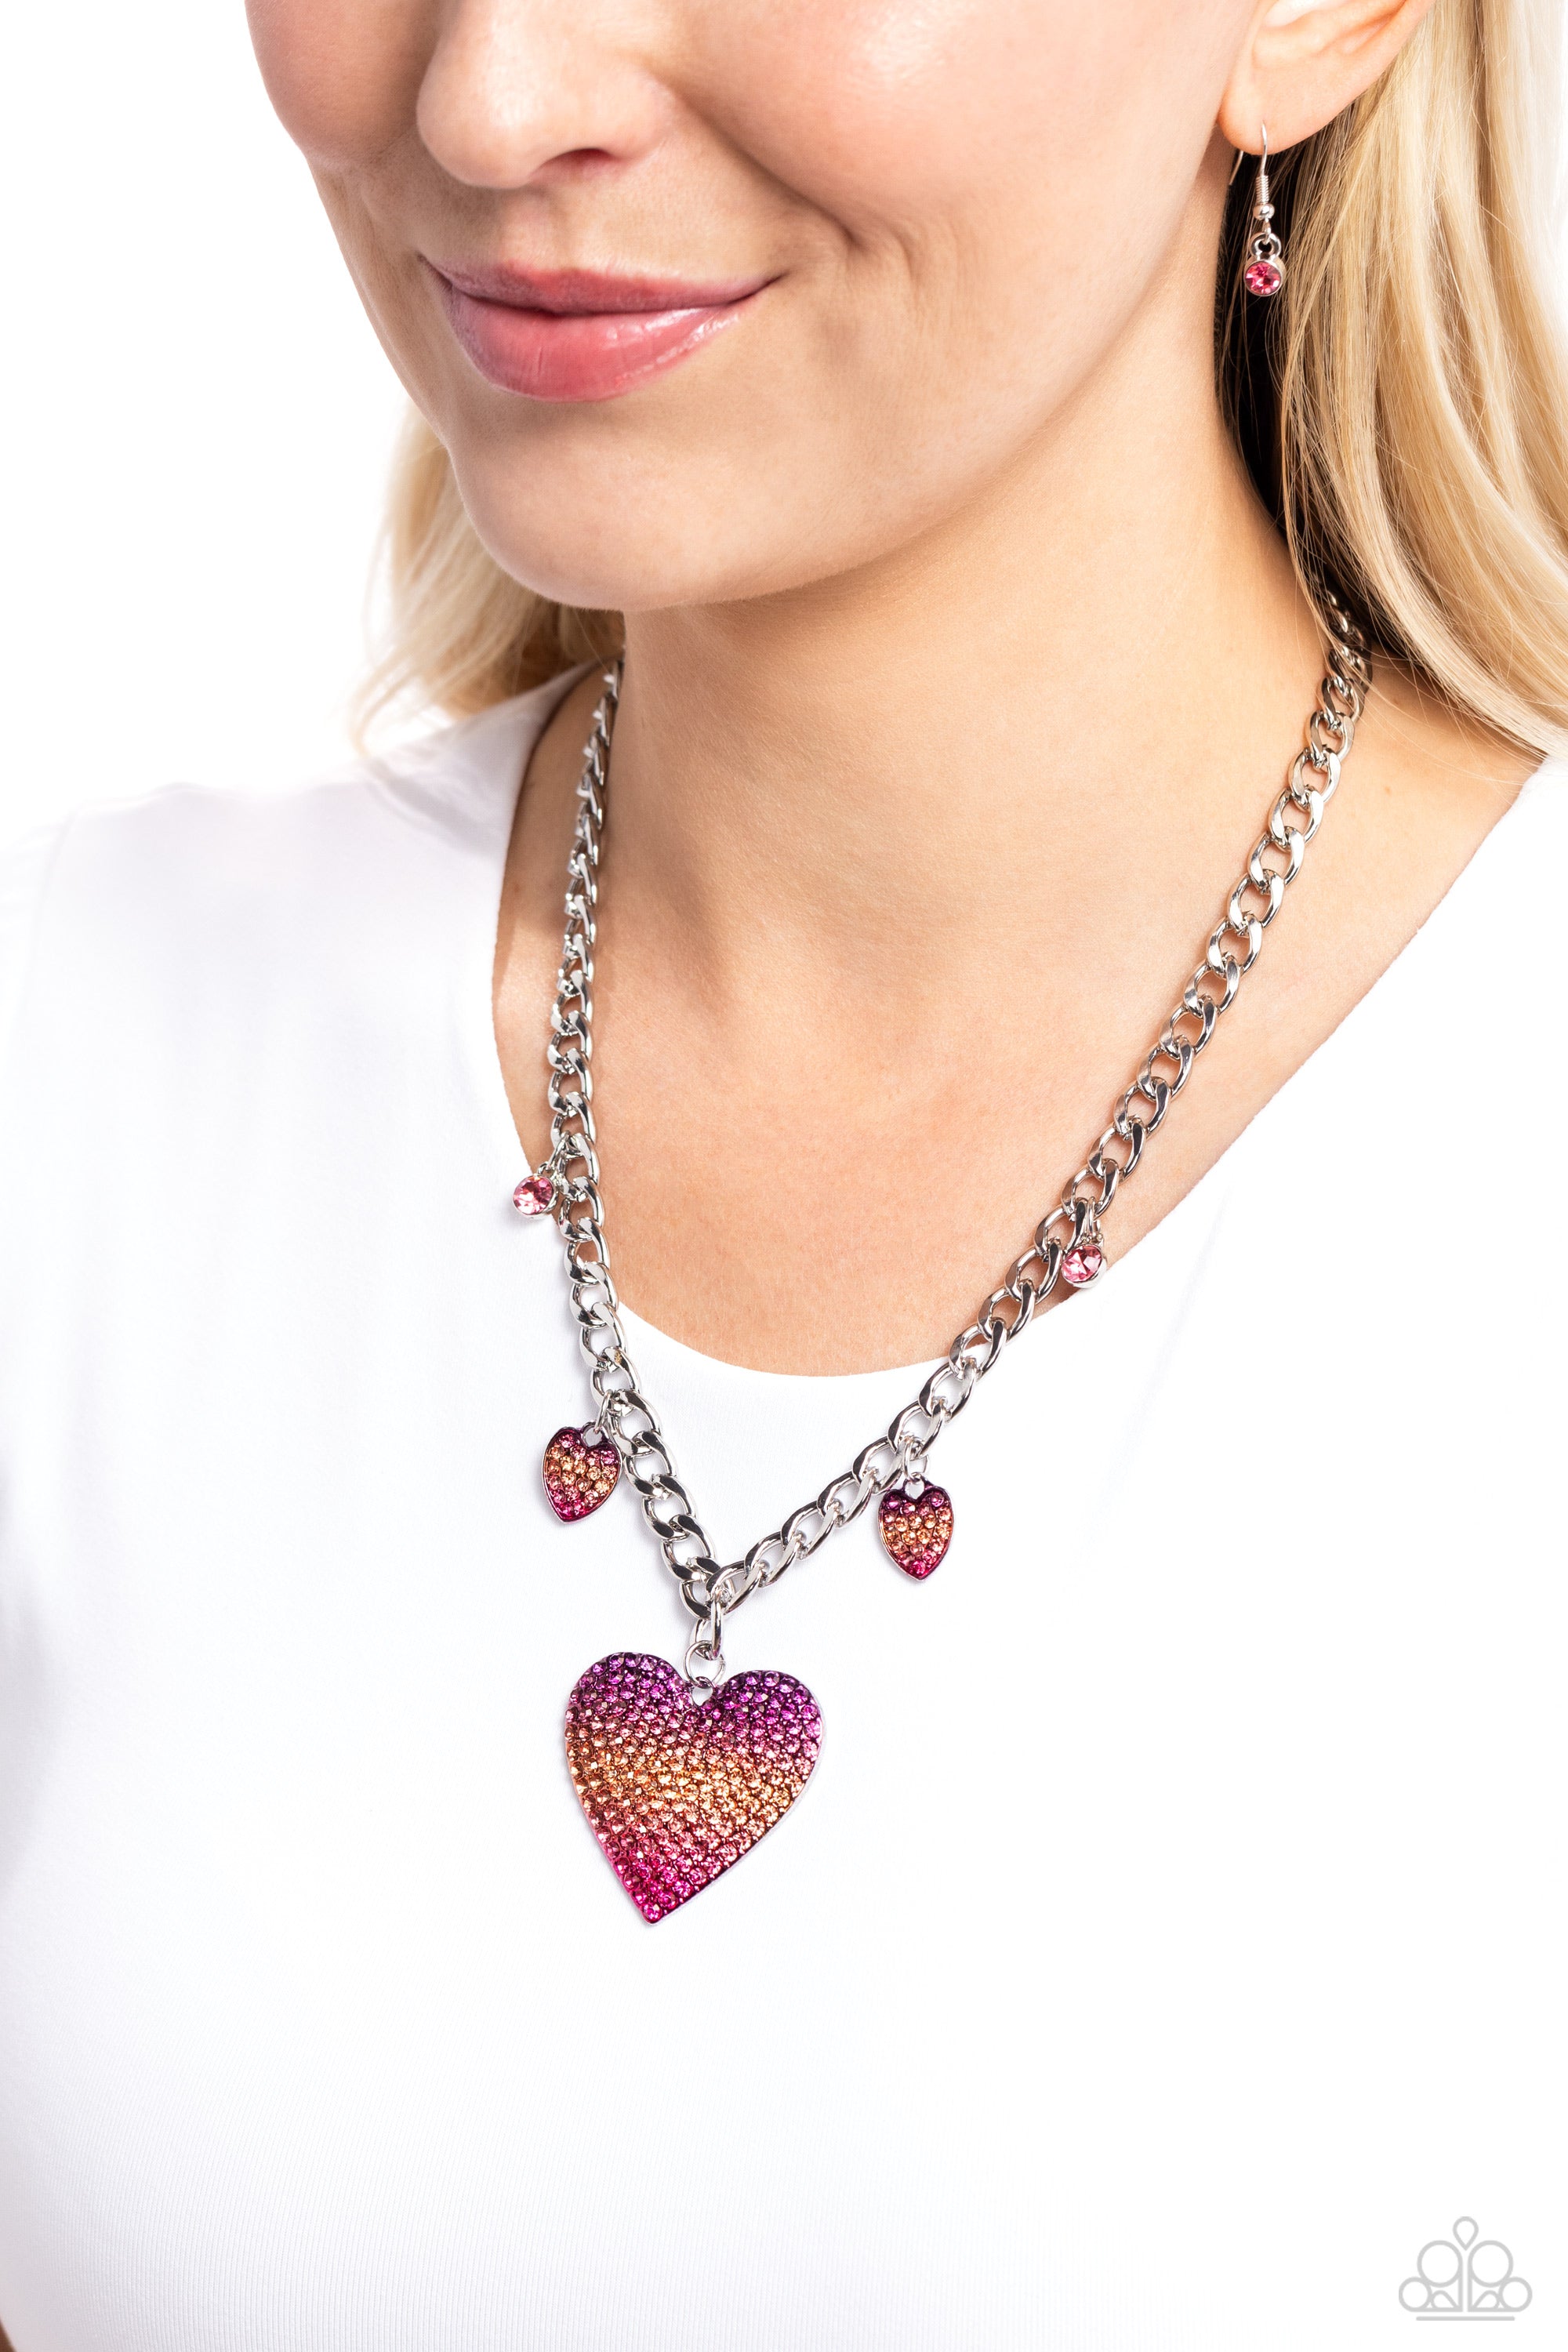 FOR THE MOST HEART PINK-NECKLACE